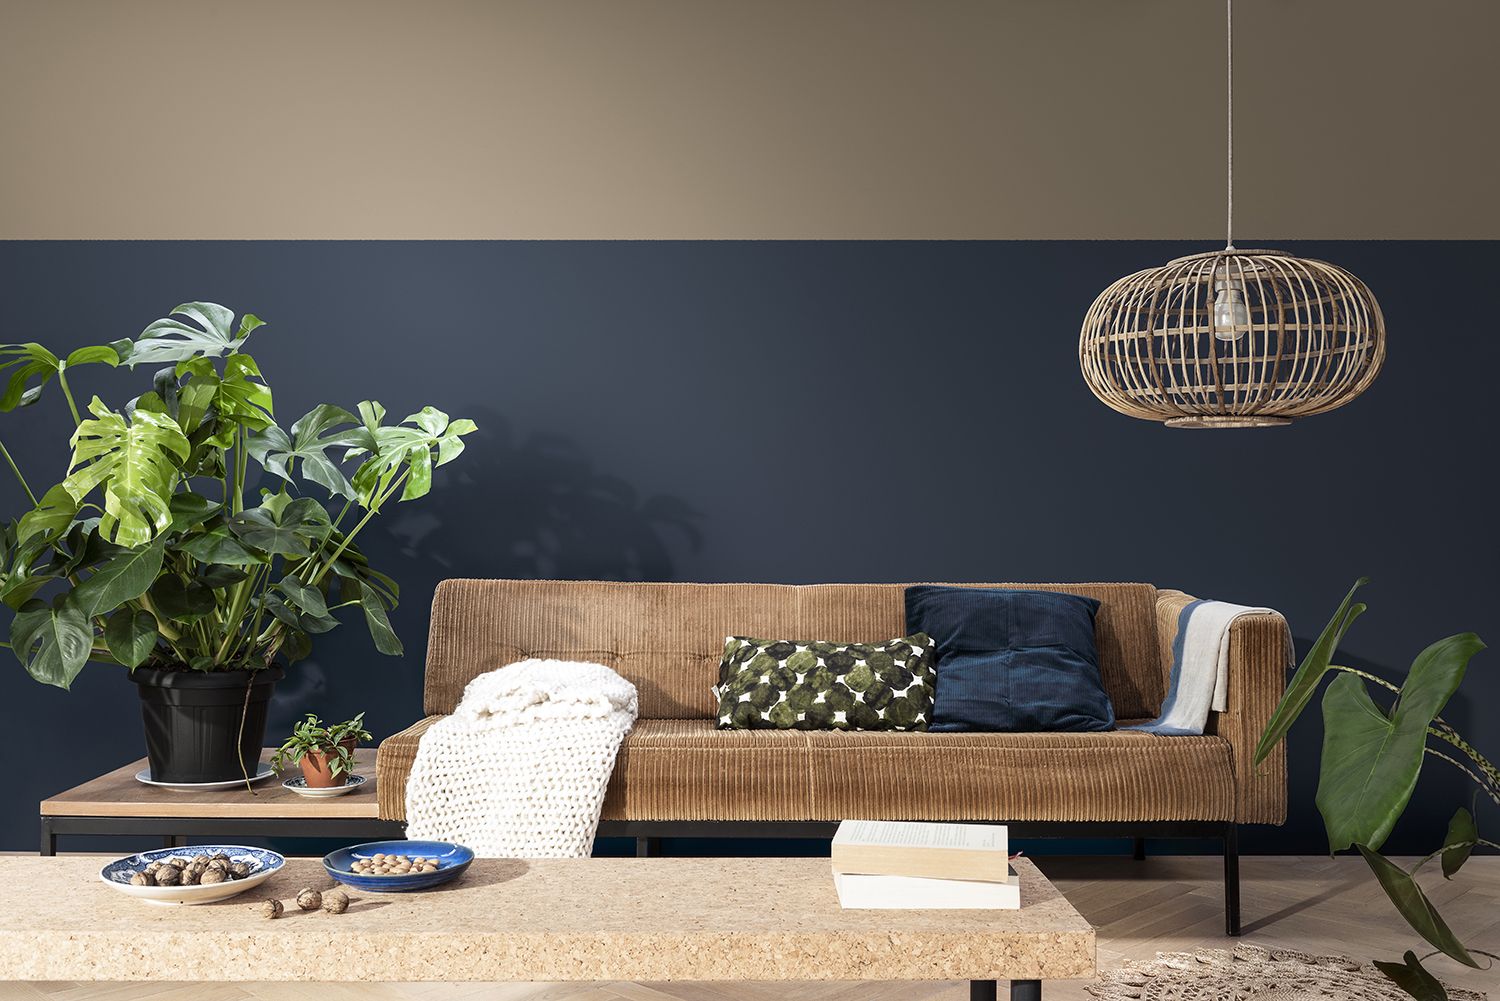 Dulux Colour of the Year - interiors experts react to the colour trend ...